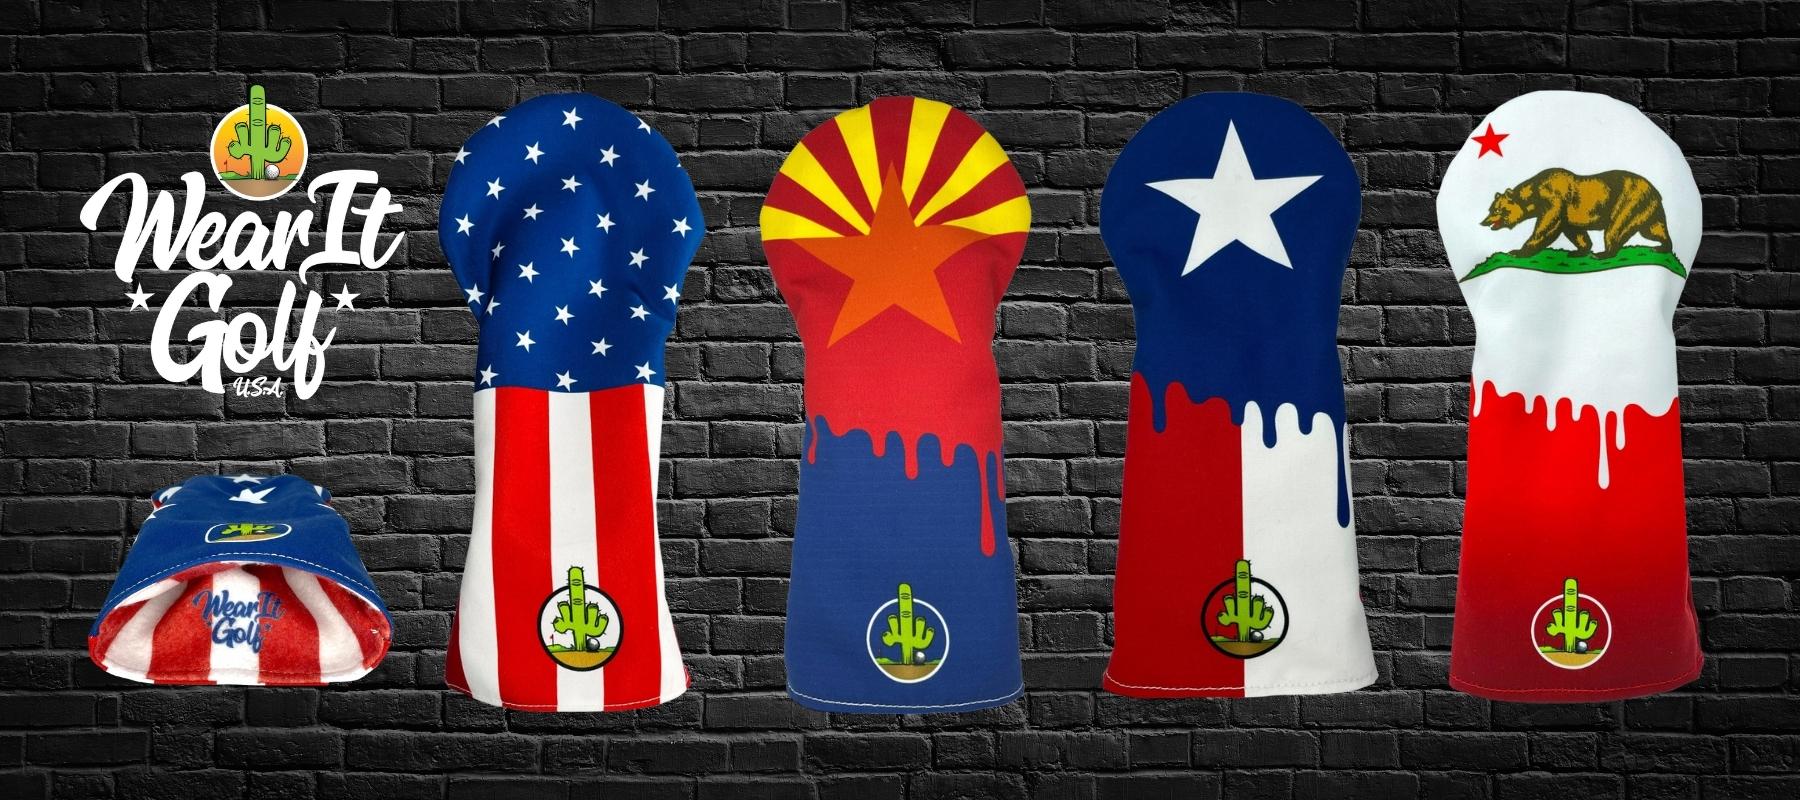 Driver Headcovers for Golf Clubs - USA Flag Headcover, Arizona State Flag Headcover, Texas State Flag Headcover, California State Flag Headcover - Wear It Golf